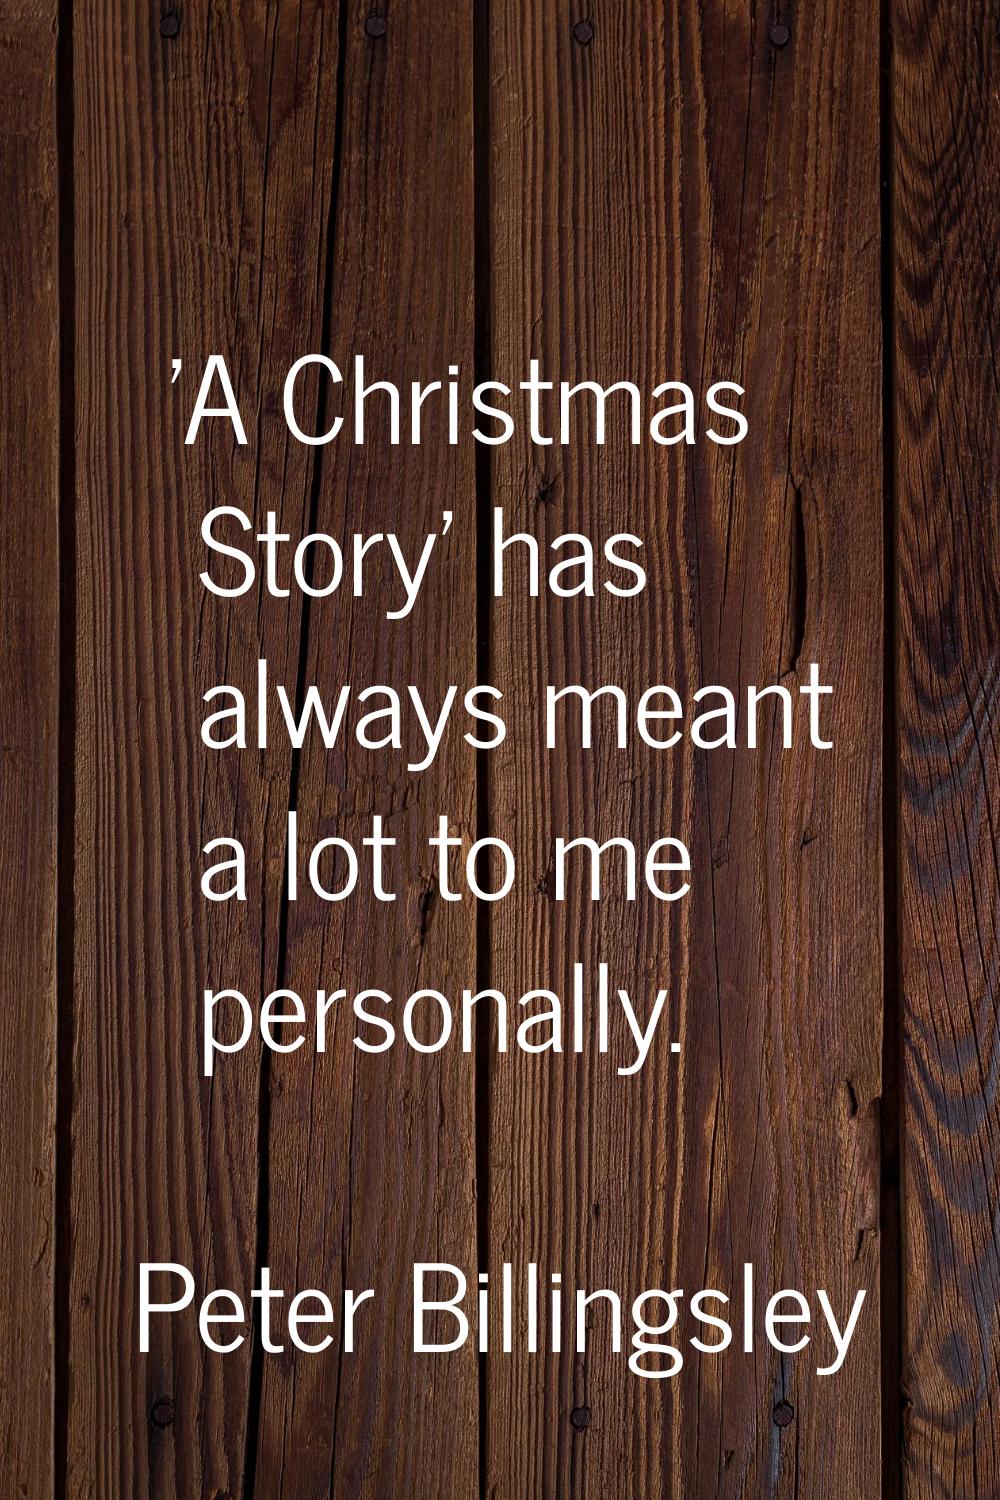 'A Christmas Story' has always meant a lot to me personally.